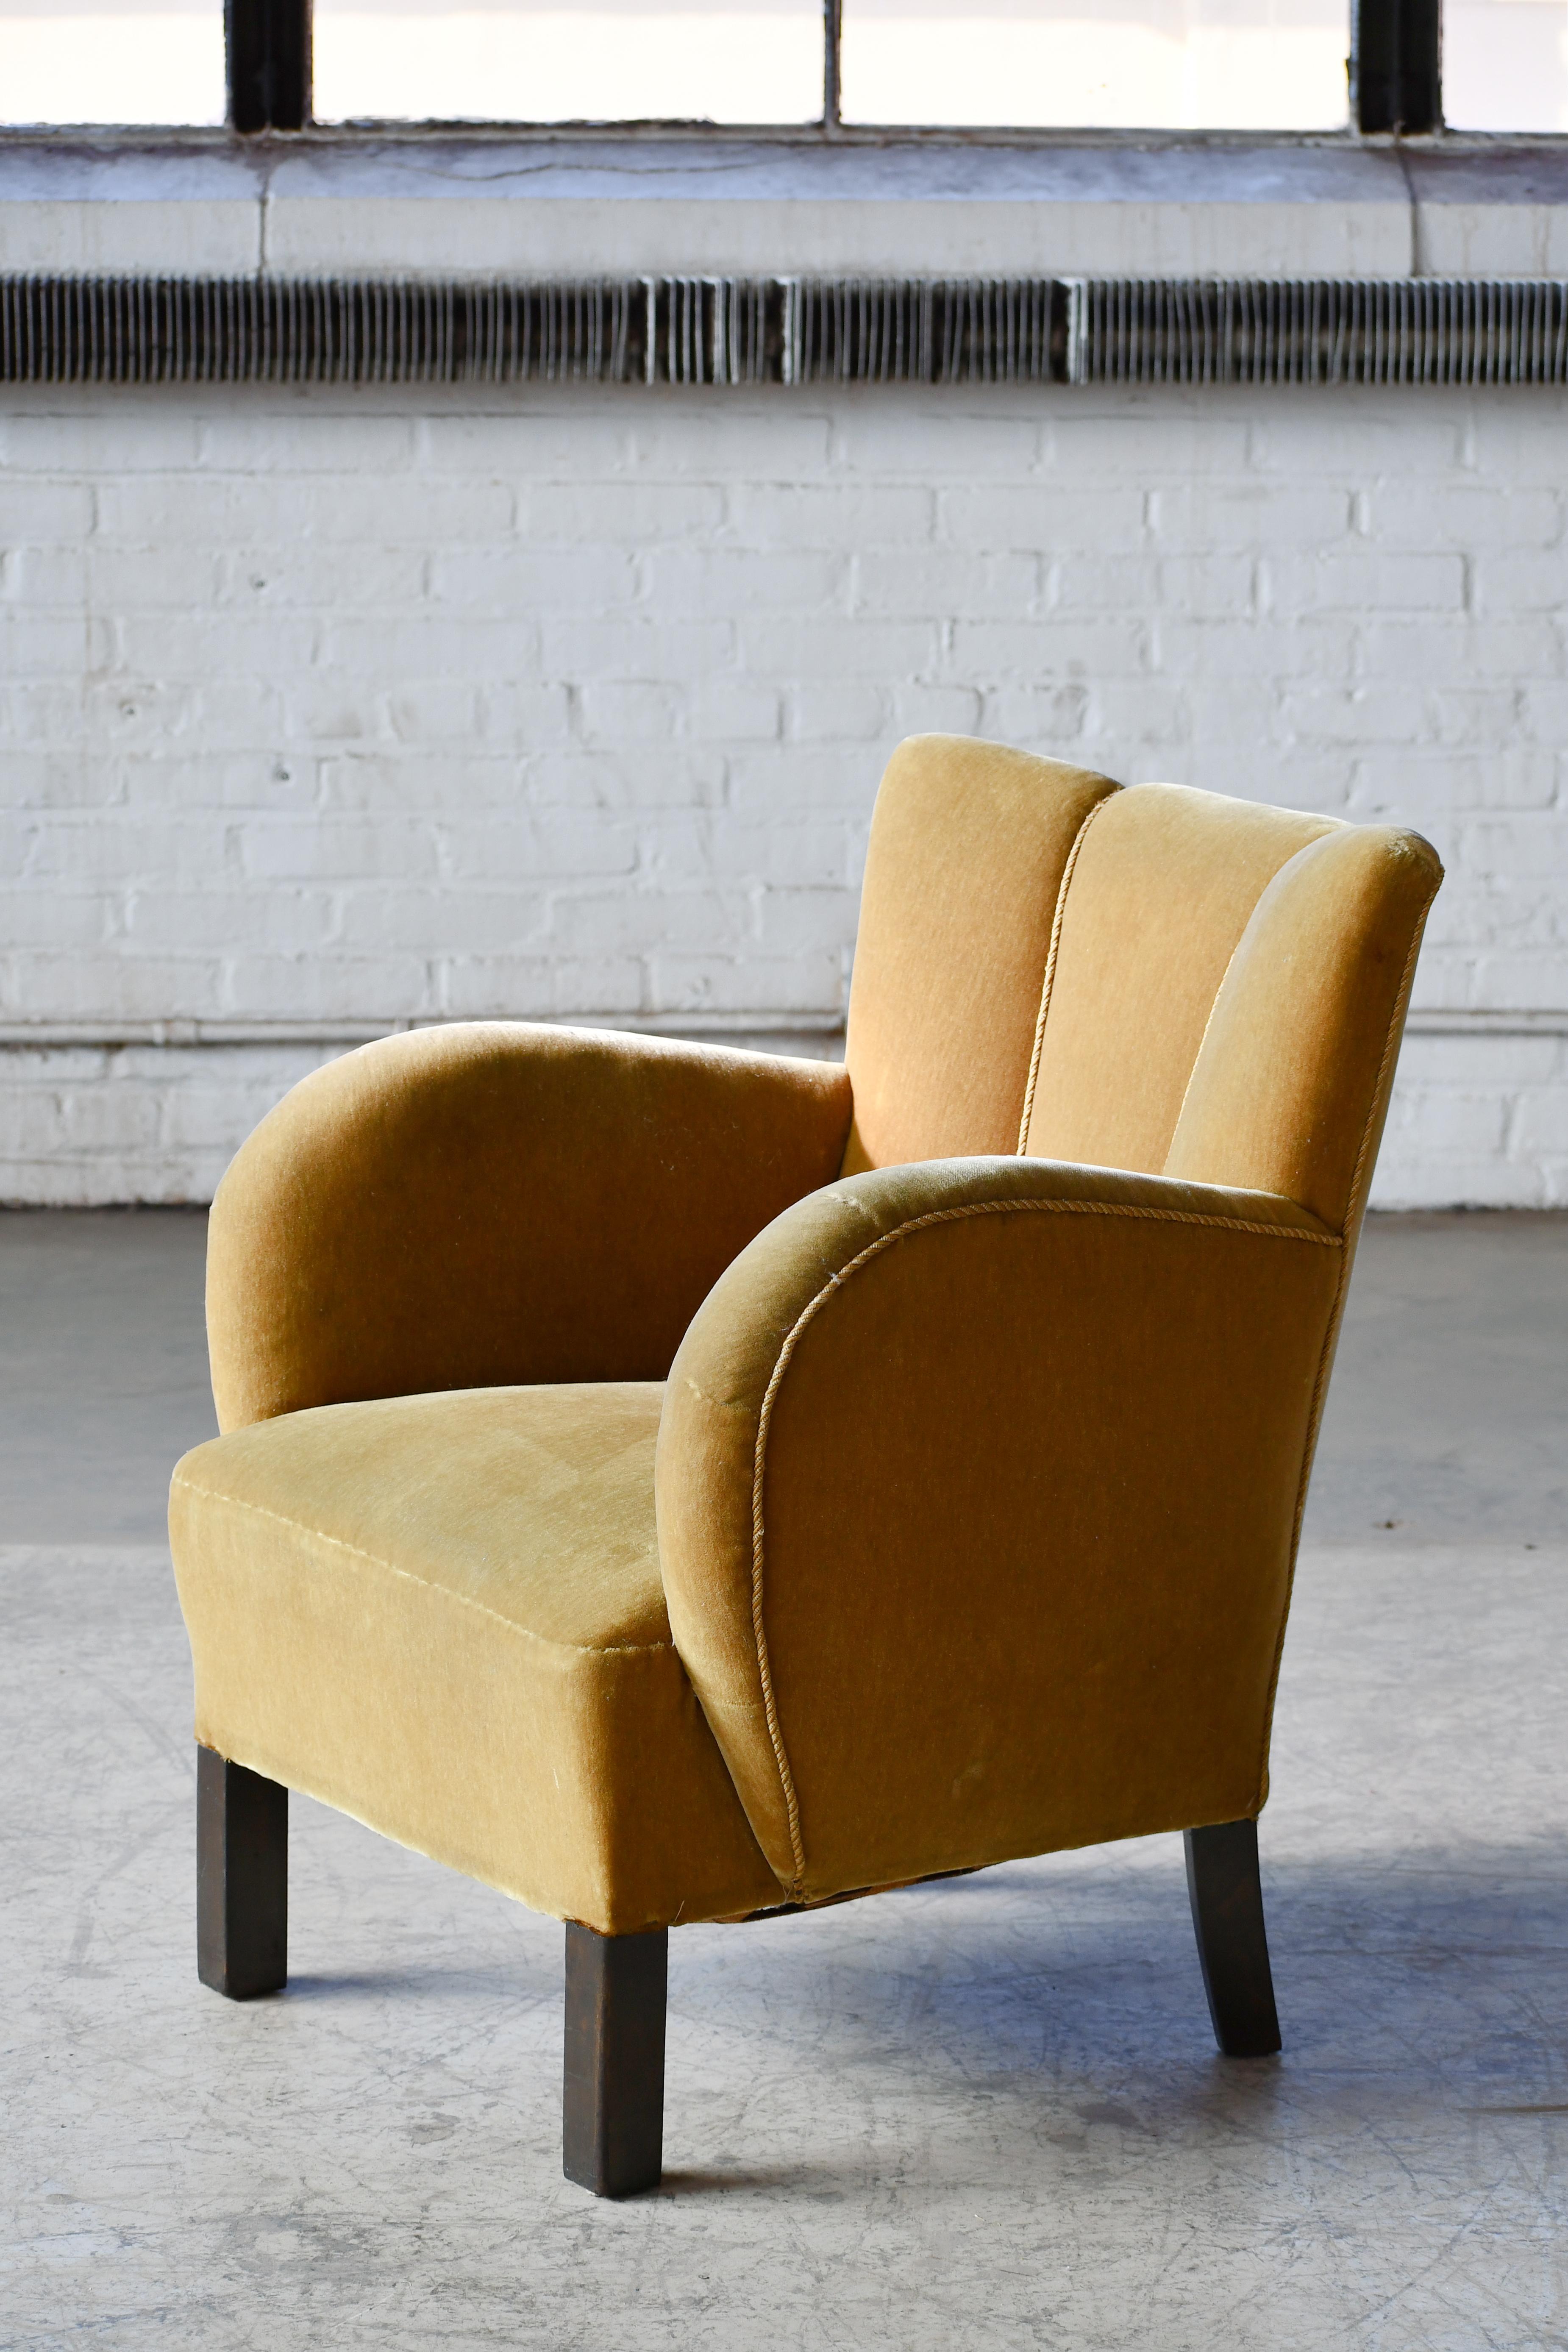 Mid-20th Century Danish Early Midcentury or Art Deco Low Lounge Chair 1930-40s (pair available) For Sale